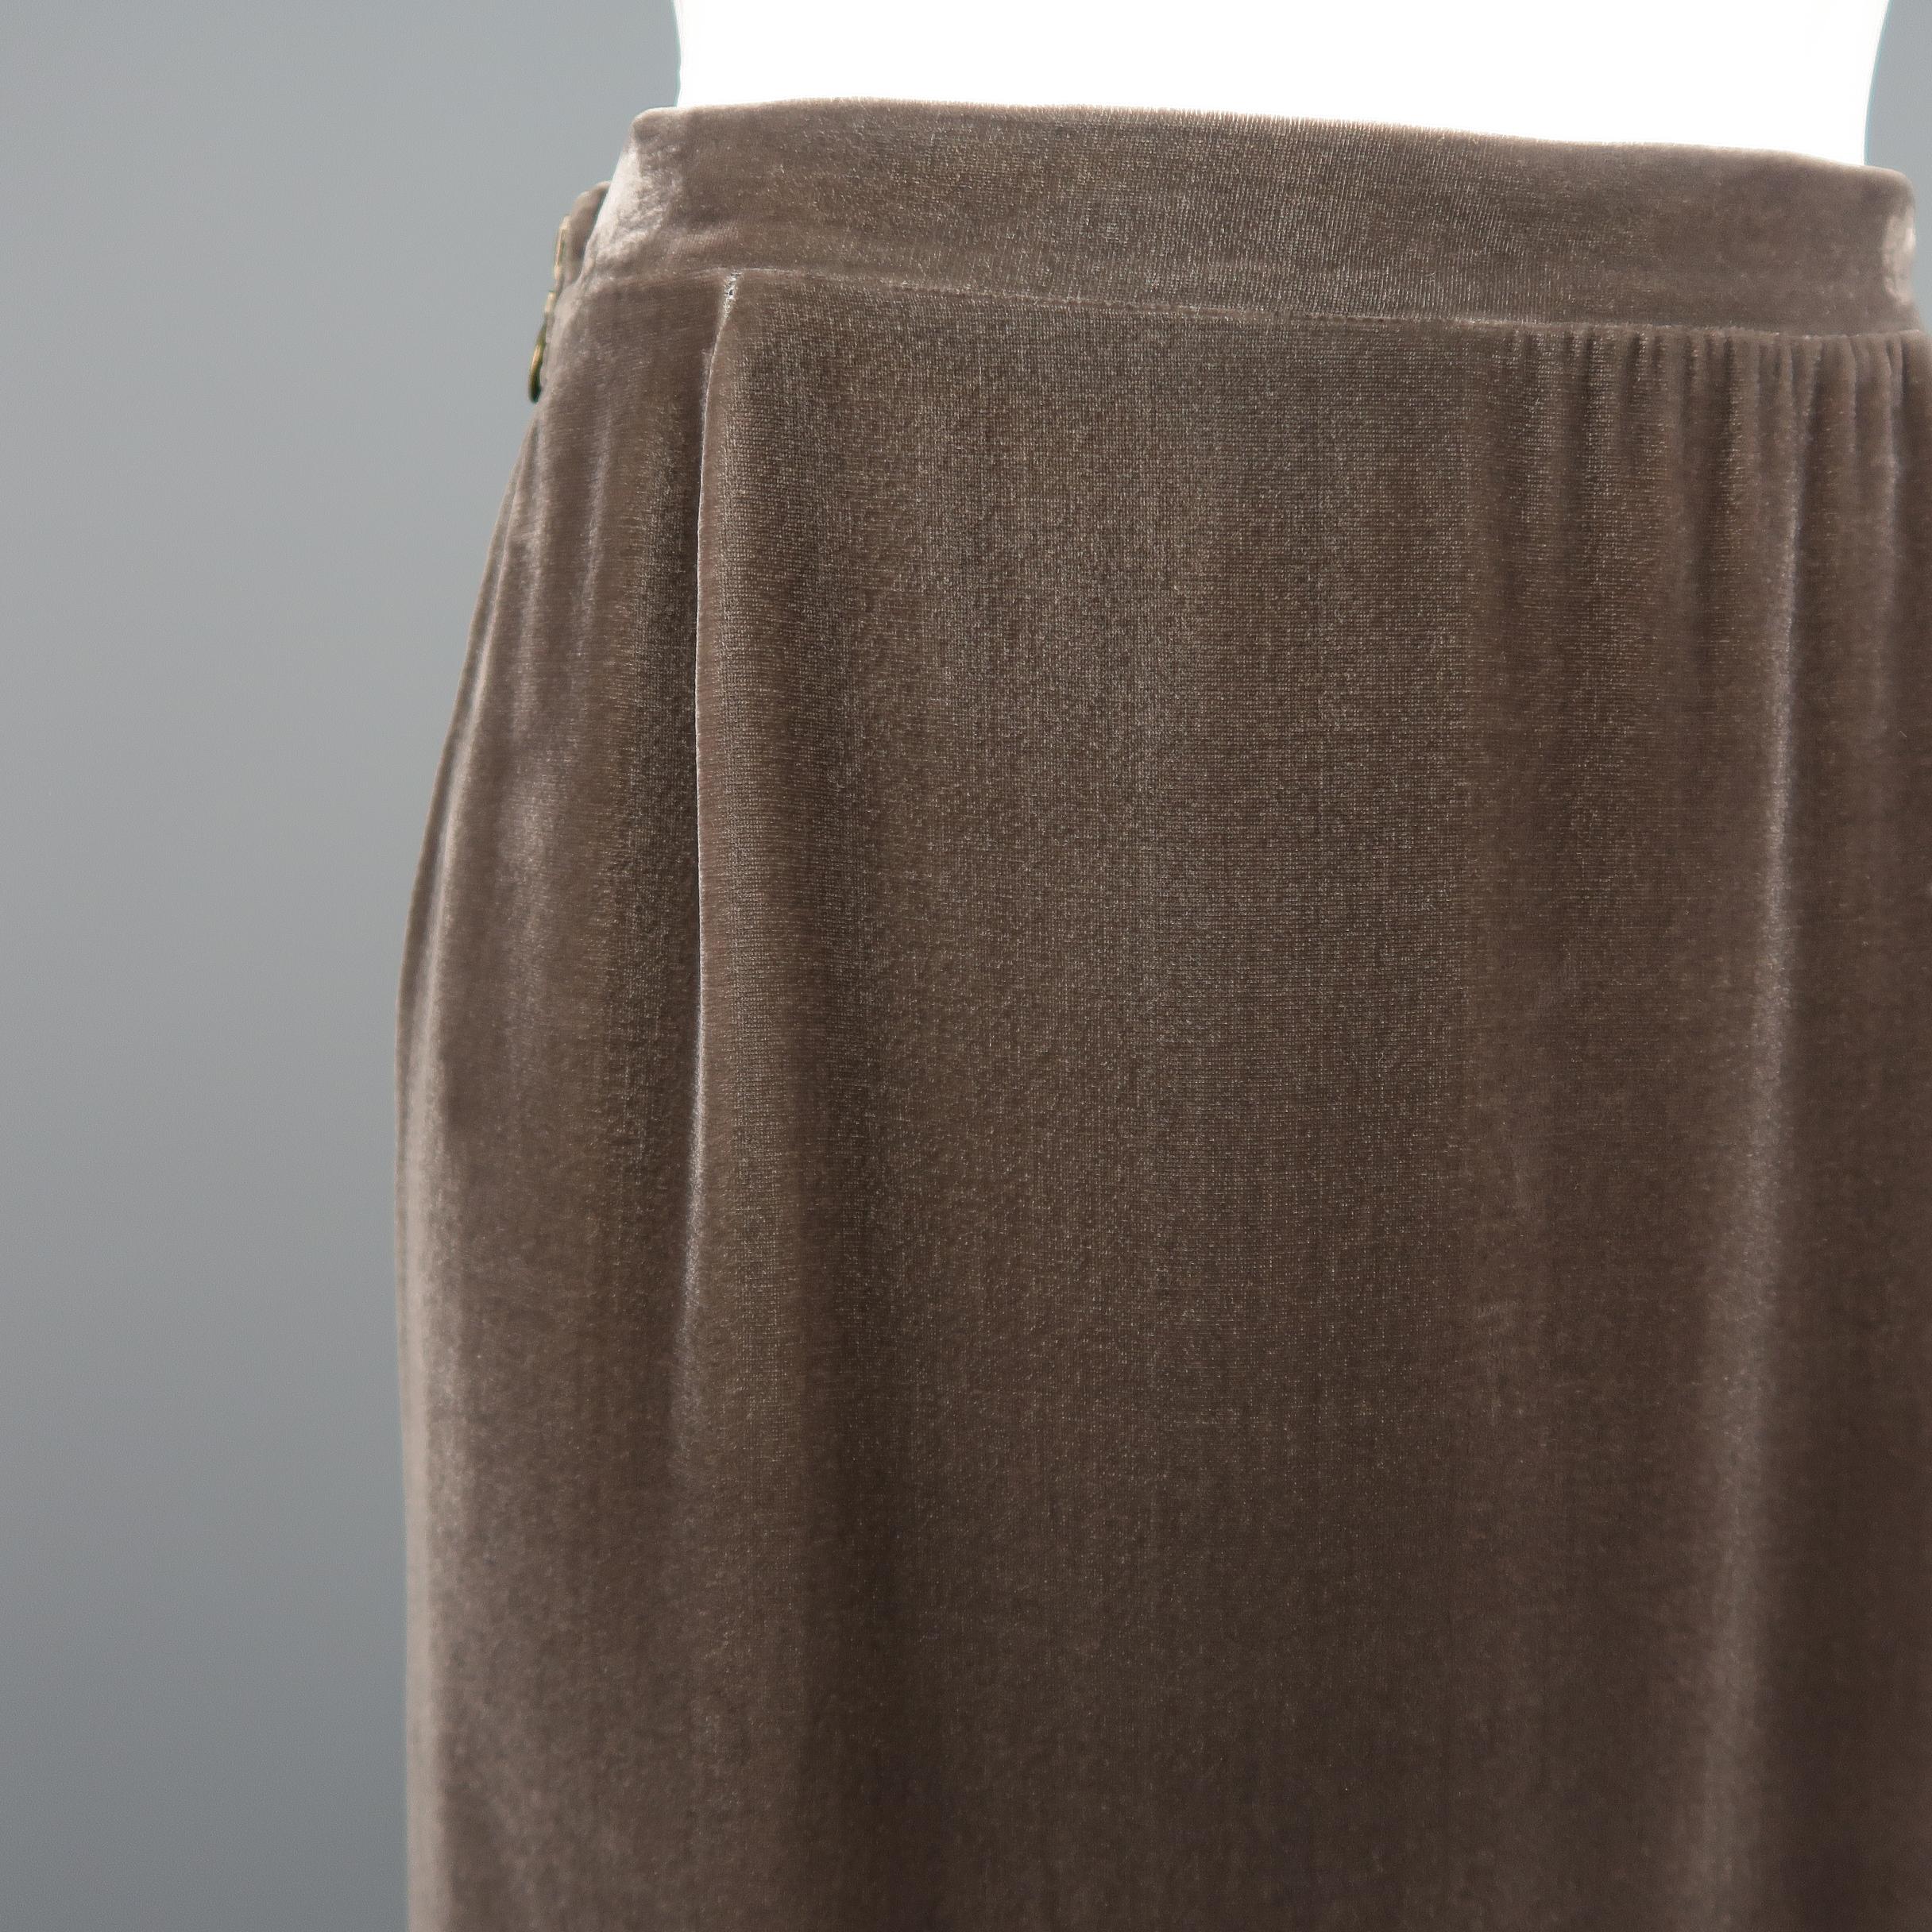 MISSONI pencil skirt comes in taupe gray silk blend velvet with a gathered front, and double dark gold tone zip sides. With Tags. Minor imperfections from hanger and tags. As-is. Made in Italy.  Retails $915.00
 
Good Pre-Owned Condition.
Marked: IT